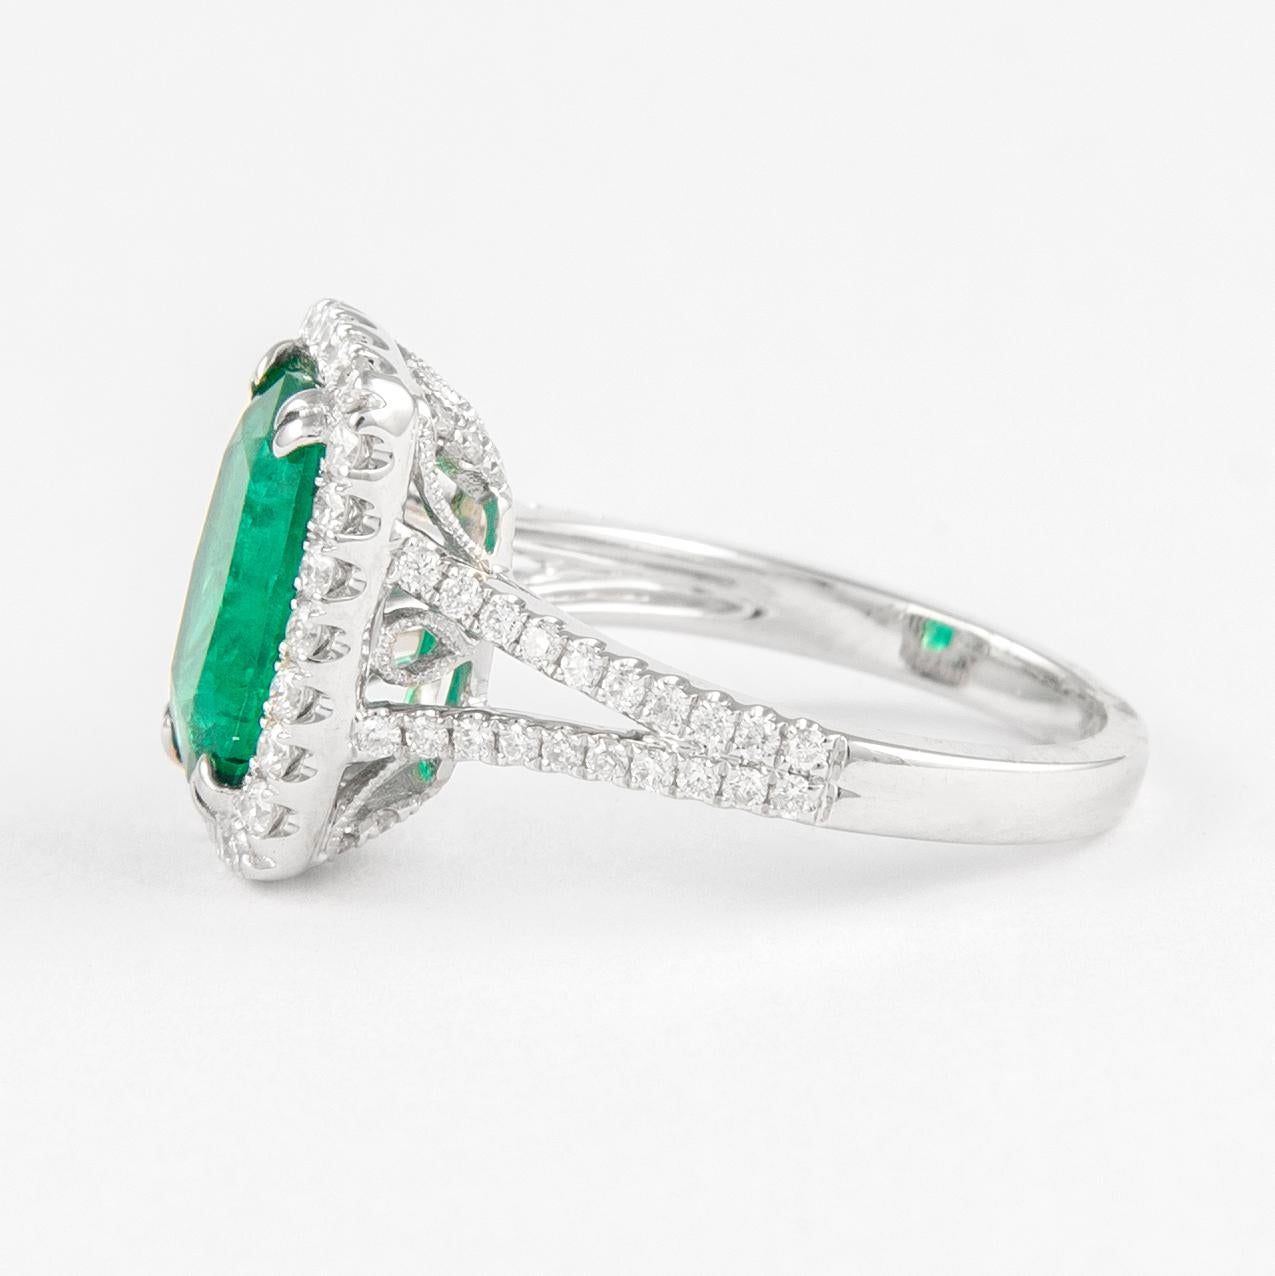 Contemporary 2.48ct Carat Mixed Cut Emerald with Diamond Halo Ring 18k White Gold